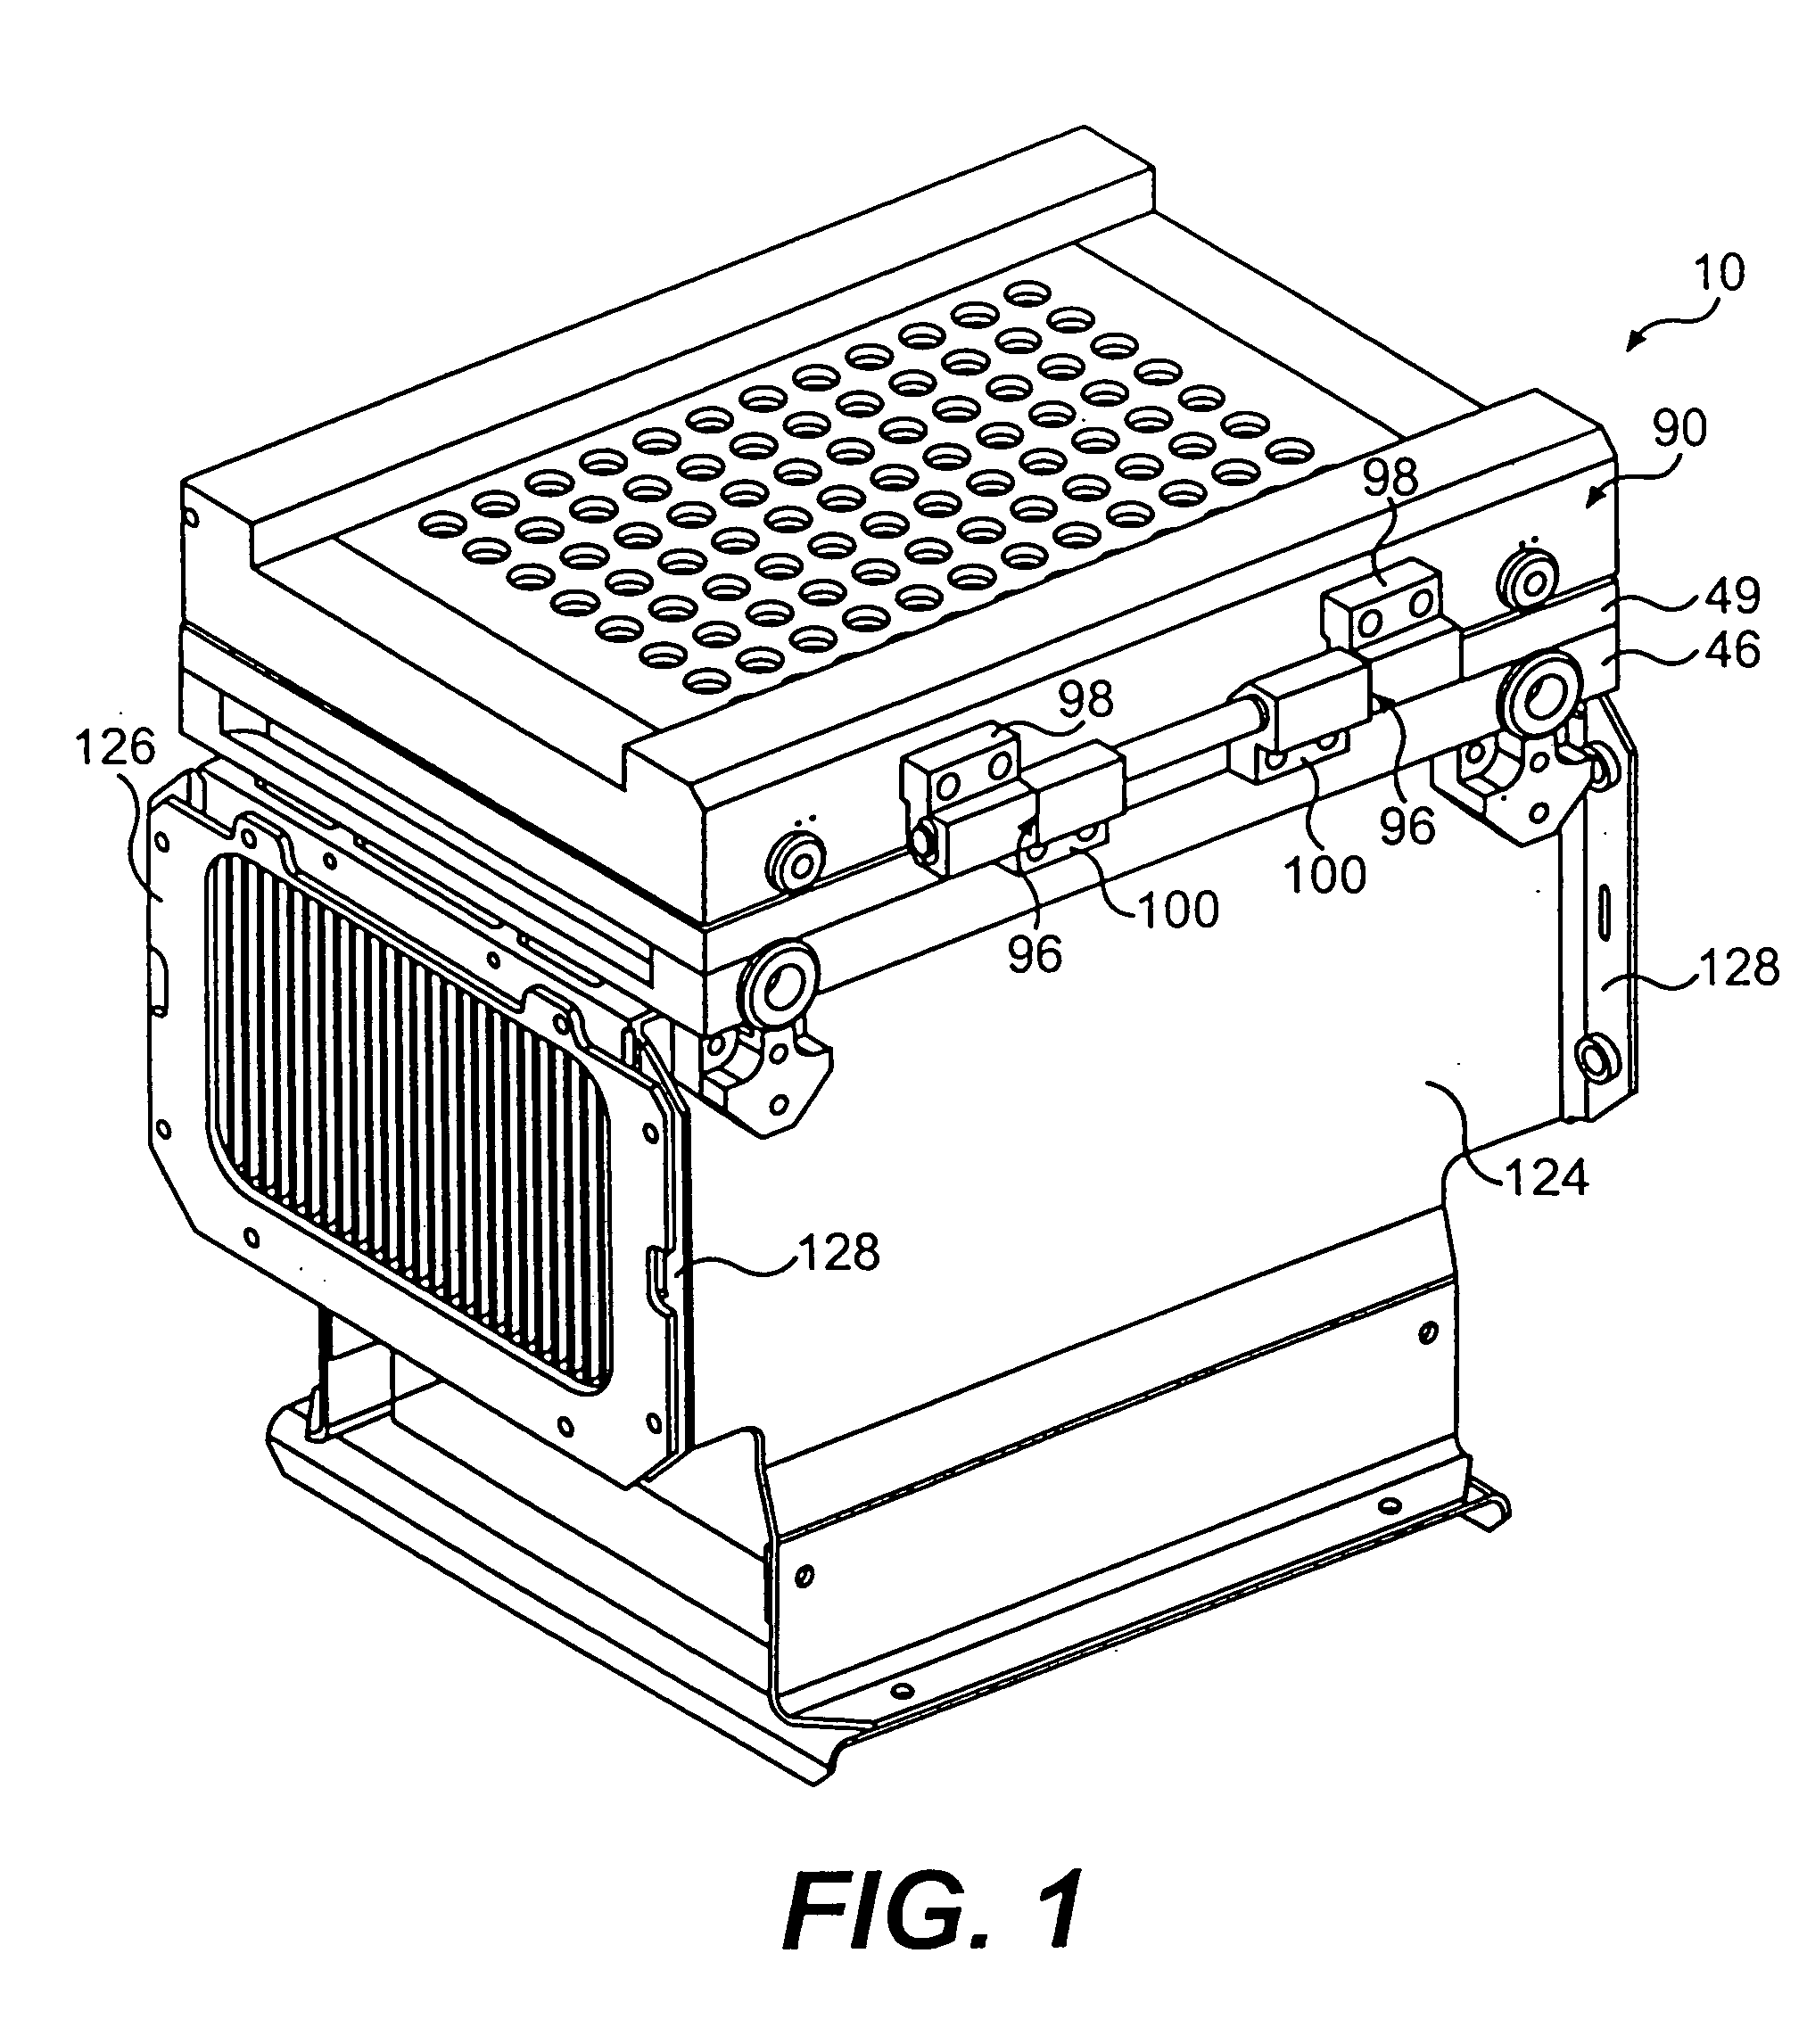 Apparatus and method for thermally cycling samples of biological material with substantial temperature uniformity